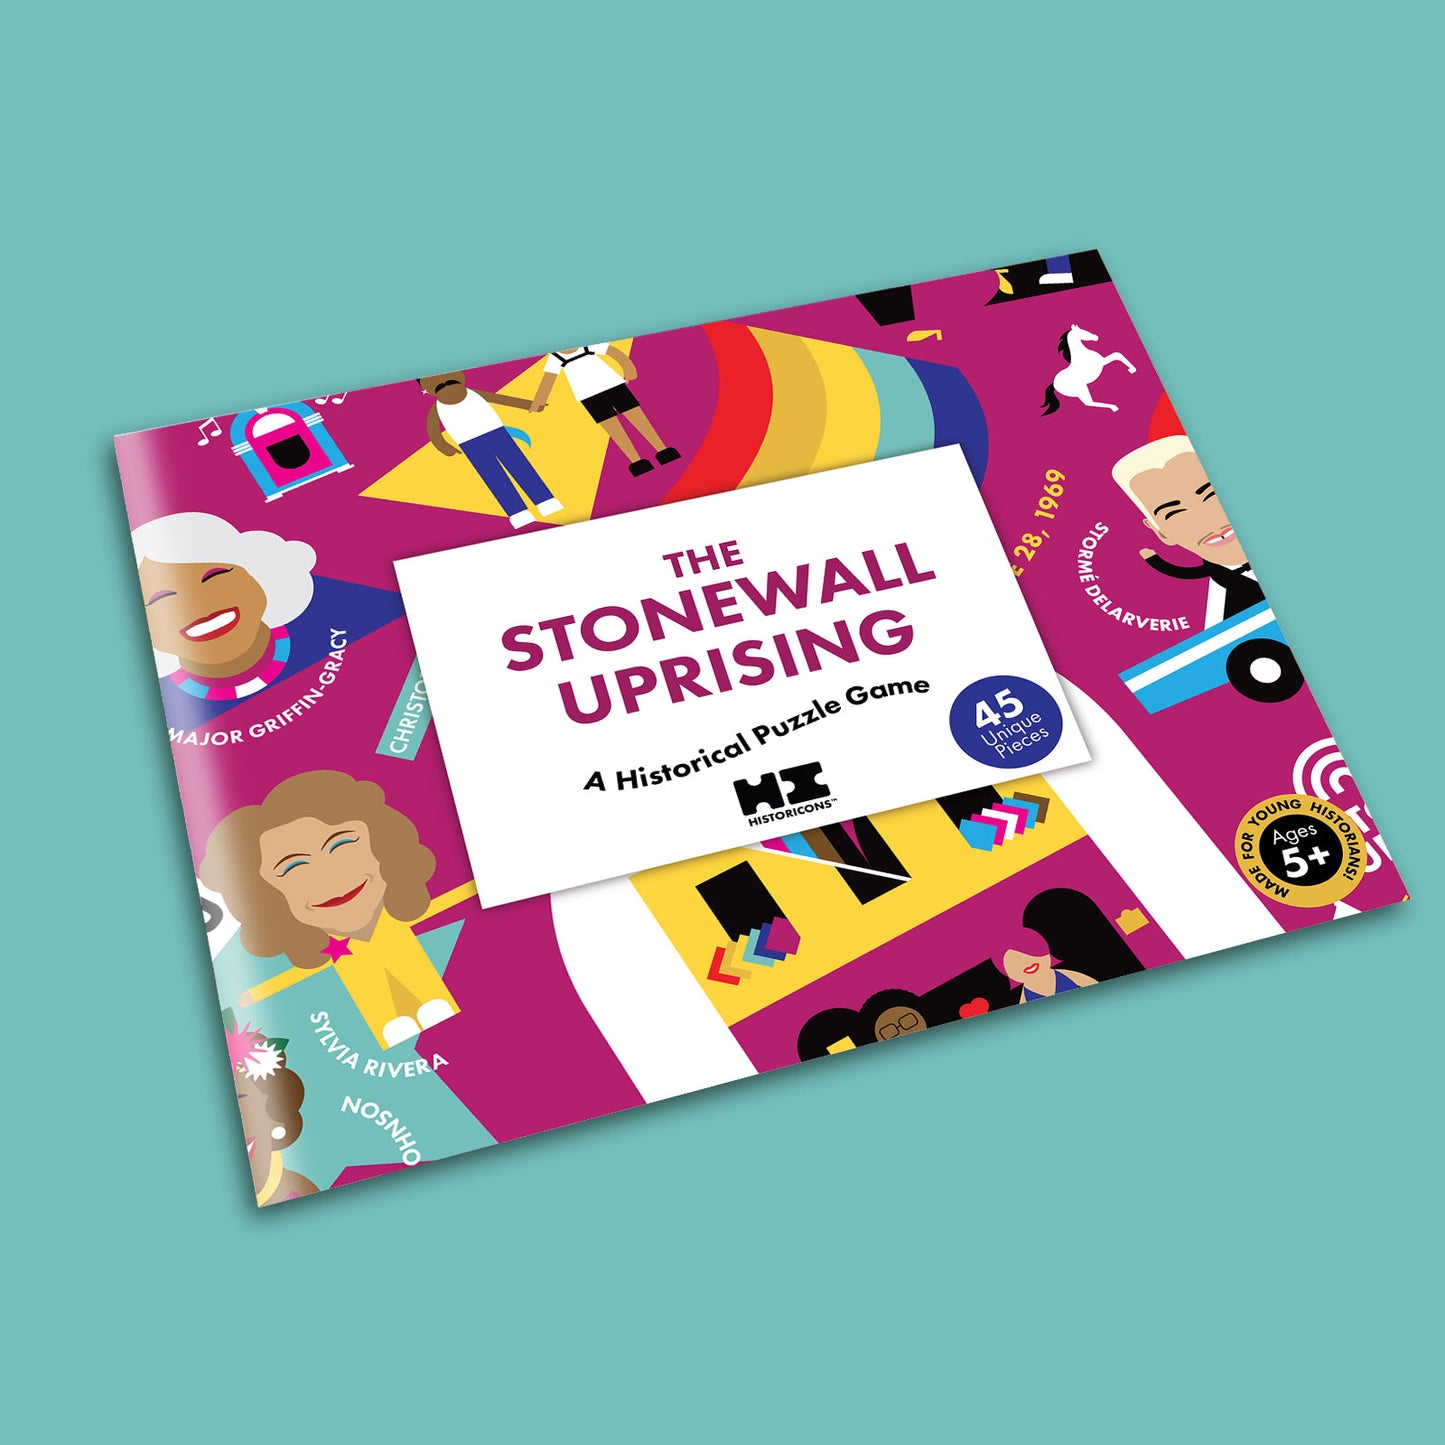 Pictured is the Historicons Stonewall Uprising kid's puzzle game in its packaging. The puzzle comes flat-packed in a glossy storage envelope for compact storage. Pictured is the front of the envelope, which is magenta and shows a zoomed in picture of some of the histoic icons and vignettes featured on the puzzle, along with text that says: The Stonewall Uprising, A Historical Puzzle Game. 45 Unique Pieces. Made for young historians ages 5+.